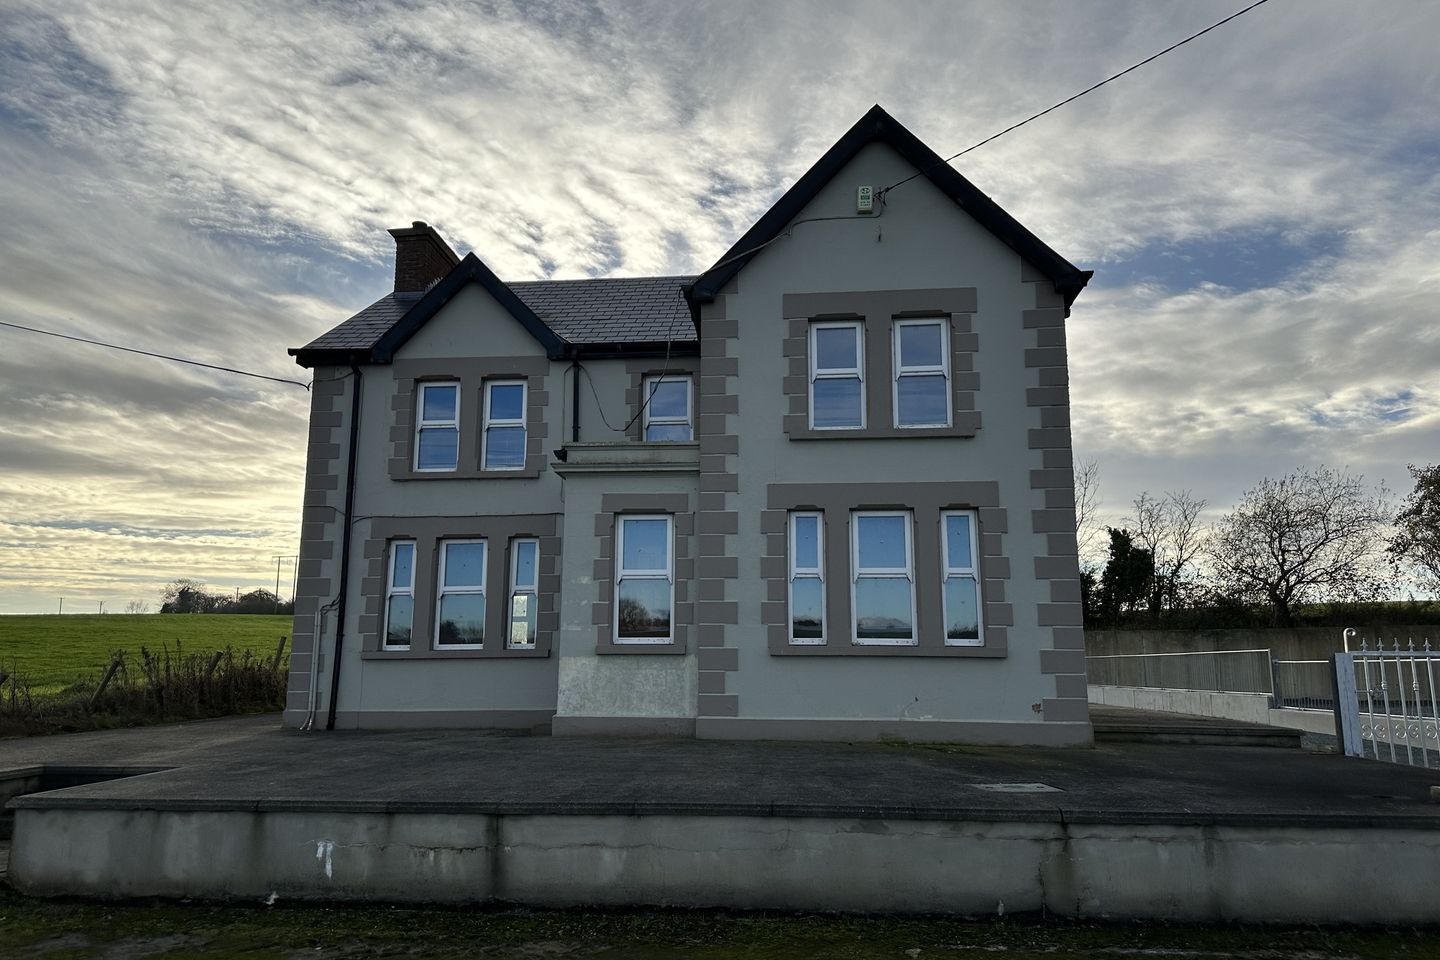 3 bed house at Sallybrook, Manorcunningham, Co. Donegal